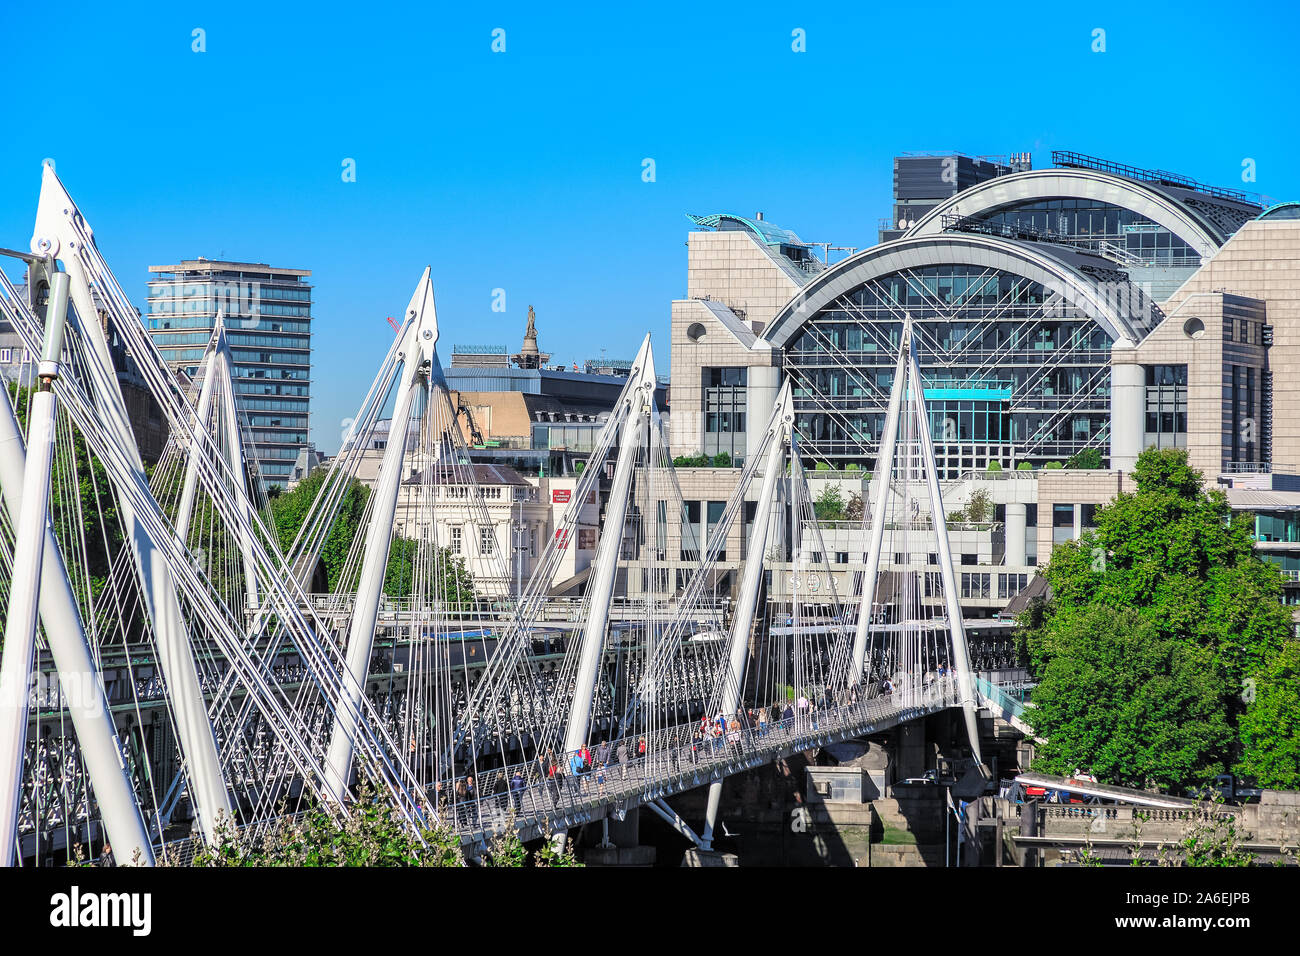 Golden Jubilee Bridges, a pedestrian footbridge, with the river side of Charing Cross station in the background in London Stock Photo